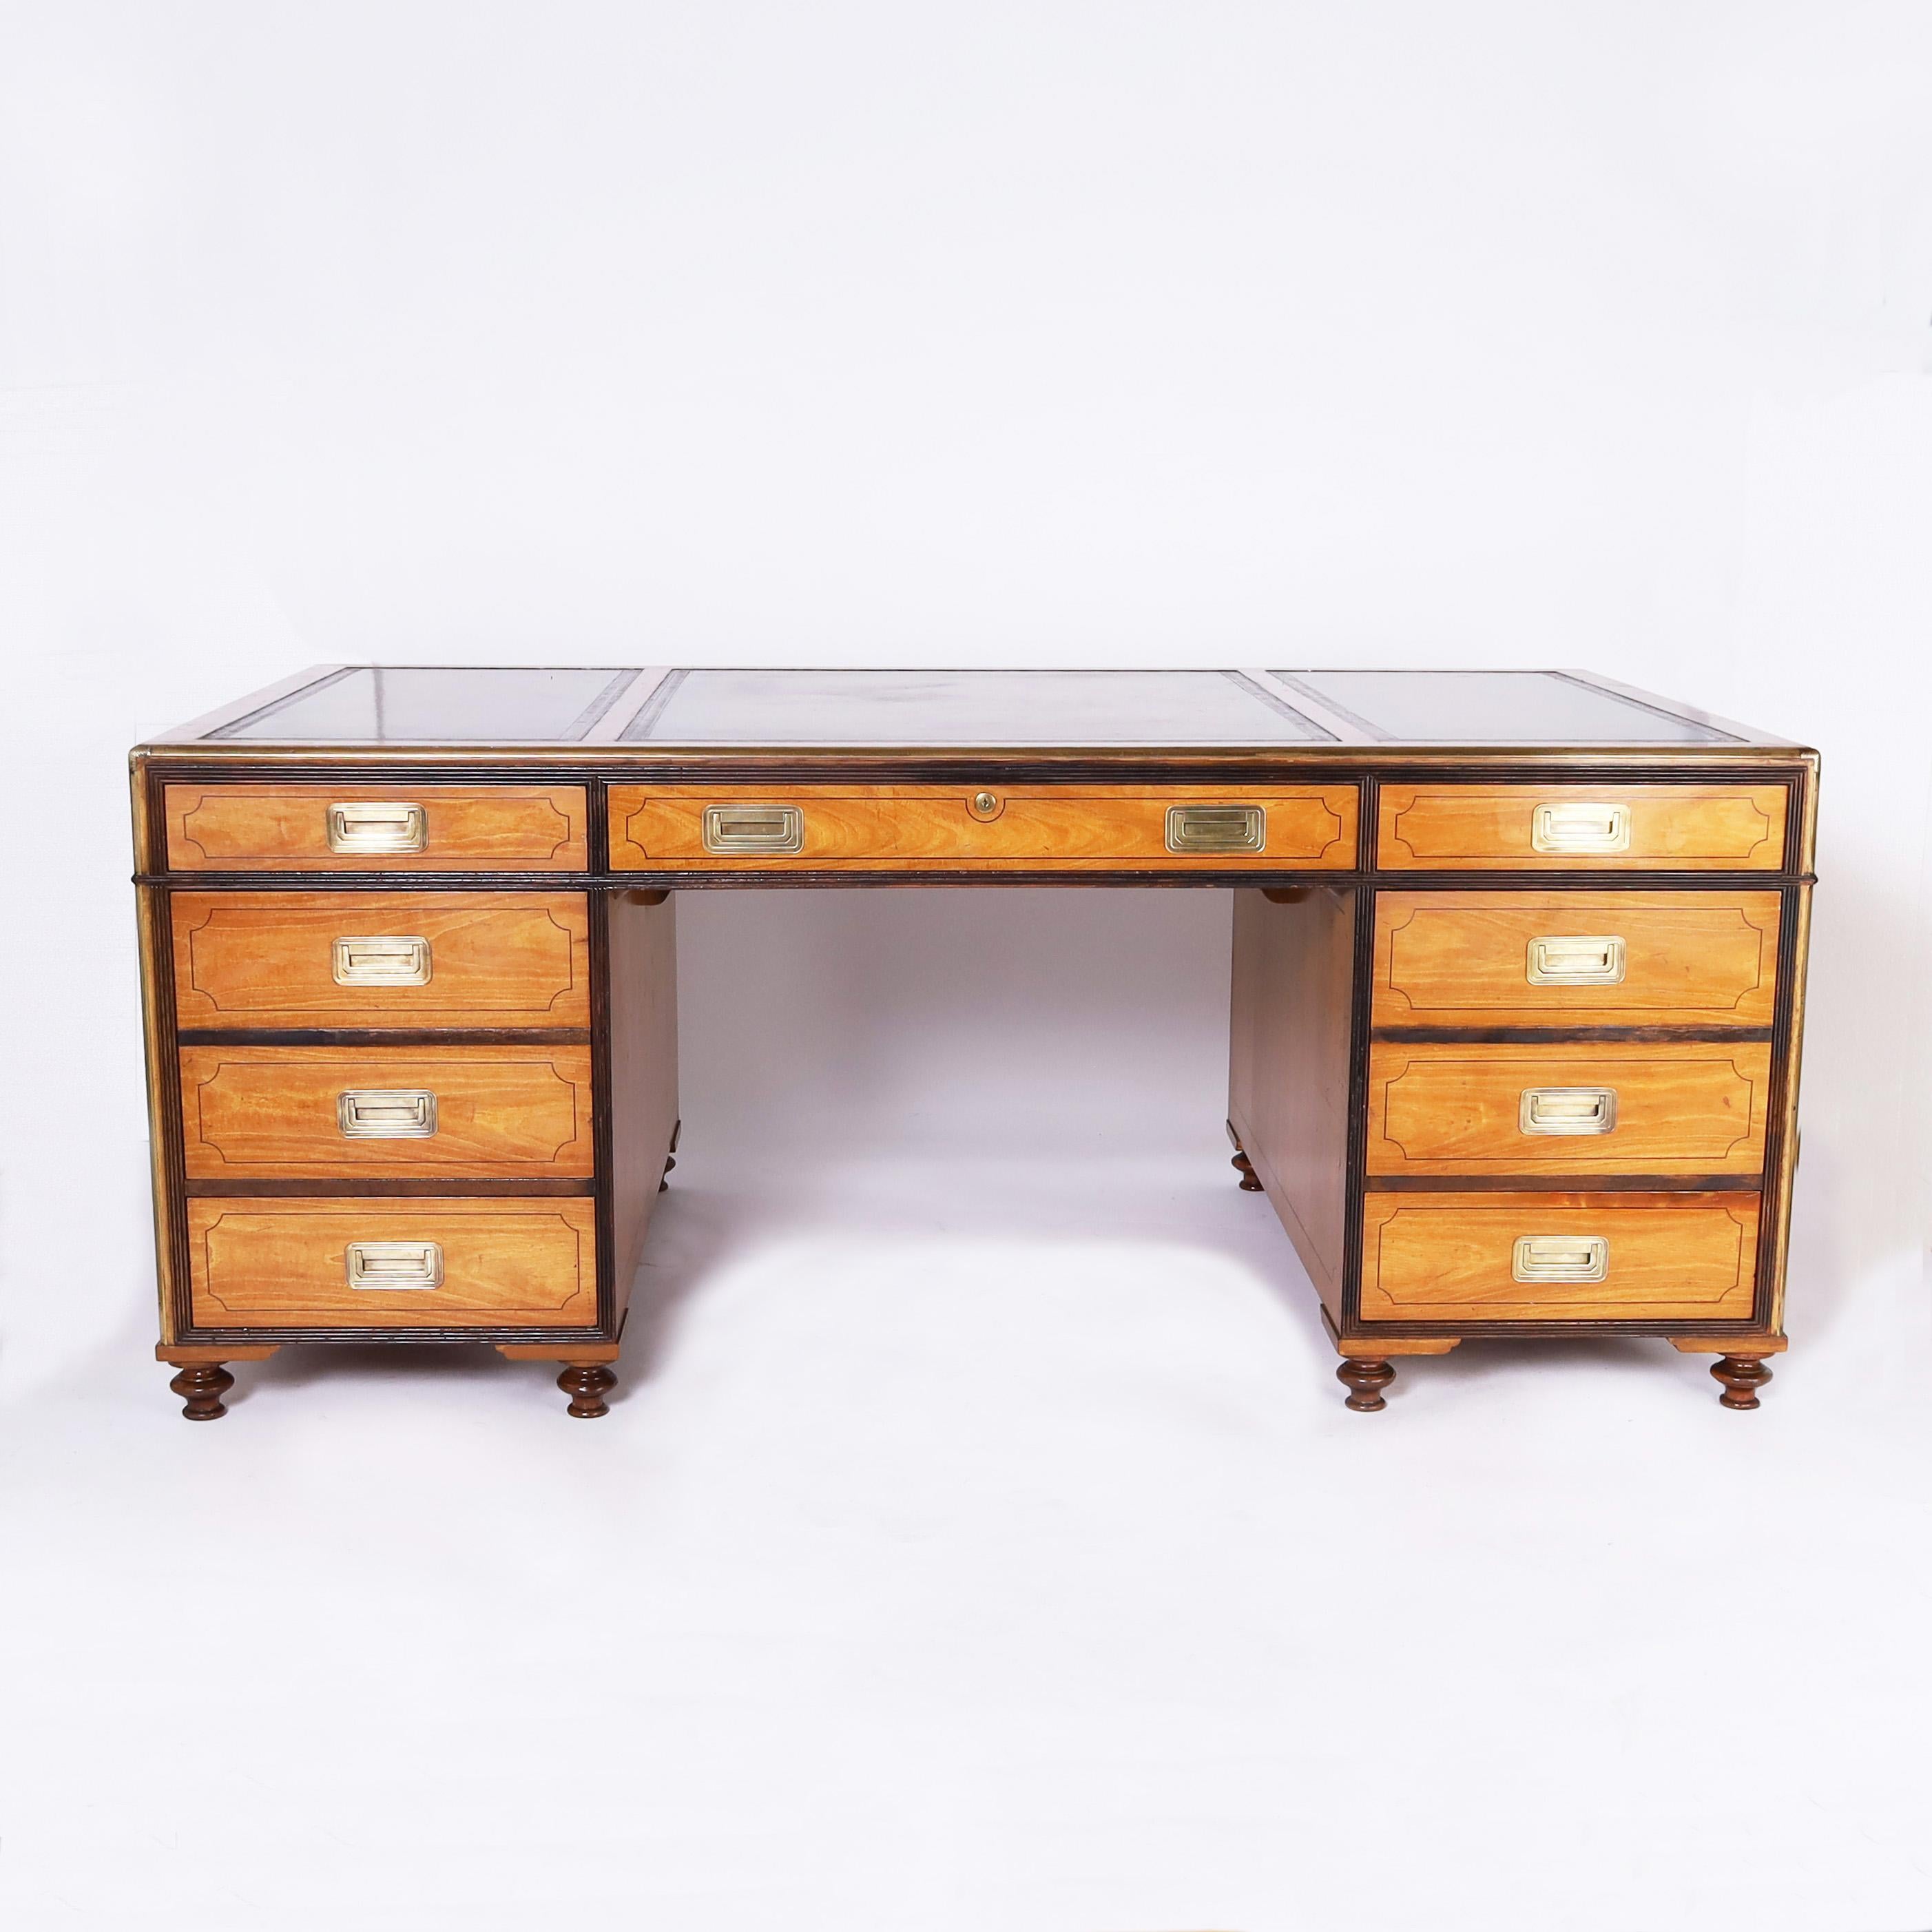 Handsome Mid Century partners desk crafted in mahogany with ebony trim and brass hardware featuring three tooled leather panels on the top over a campaign style twin pedestal form having ten drawers on one side and three drawers and two cabinets on